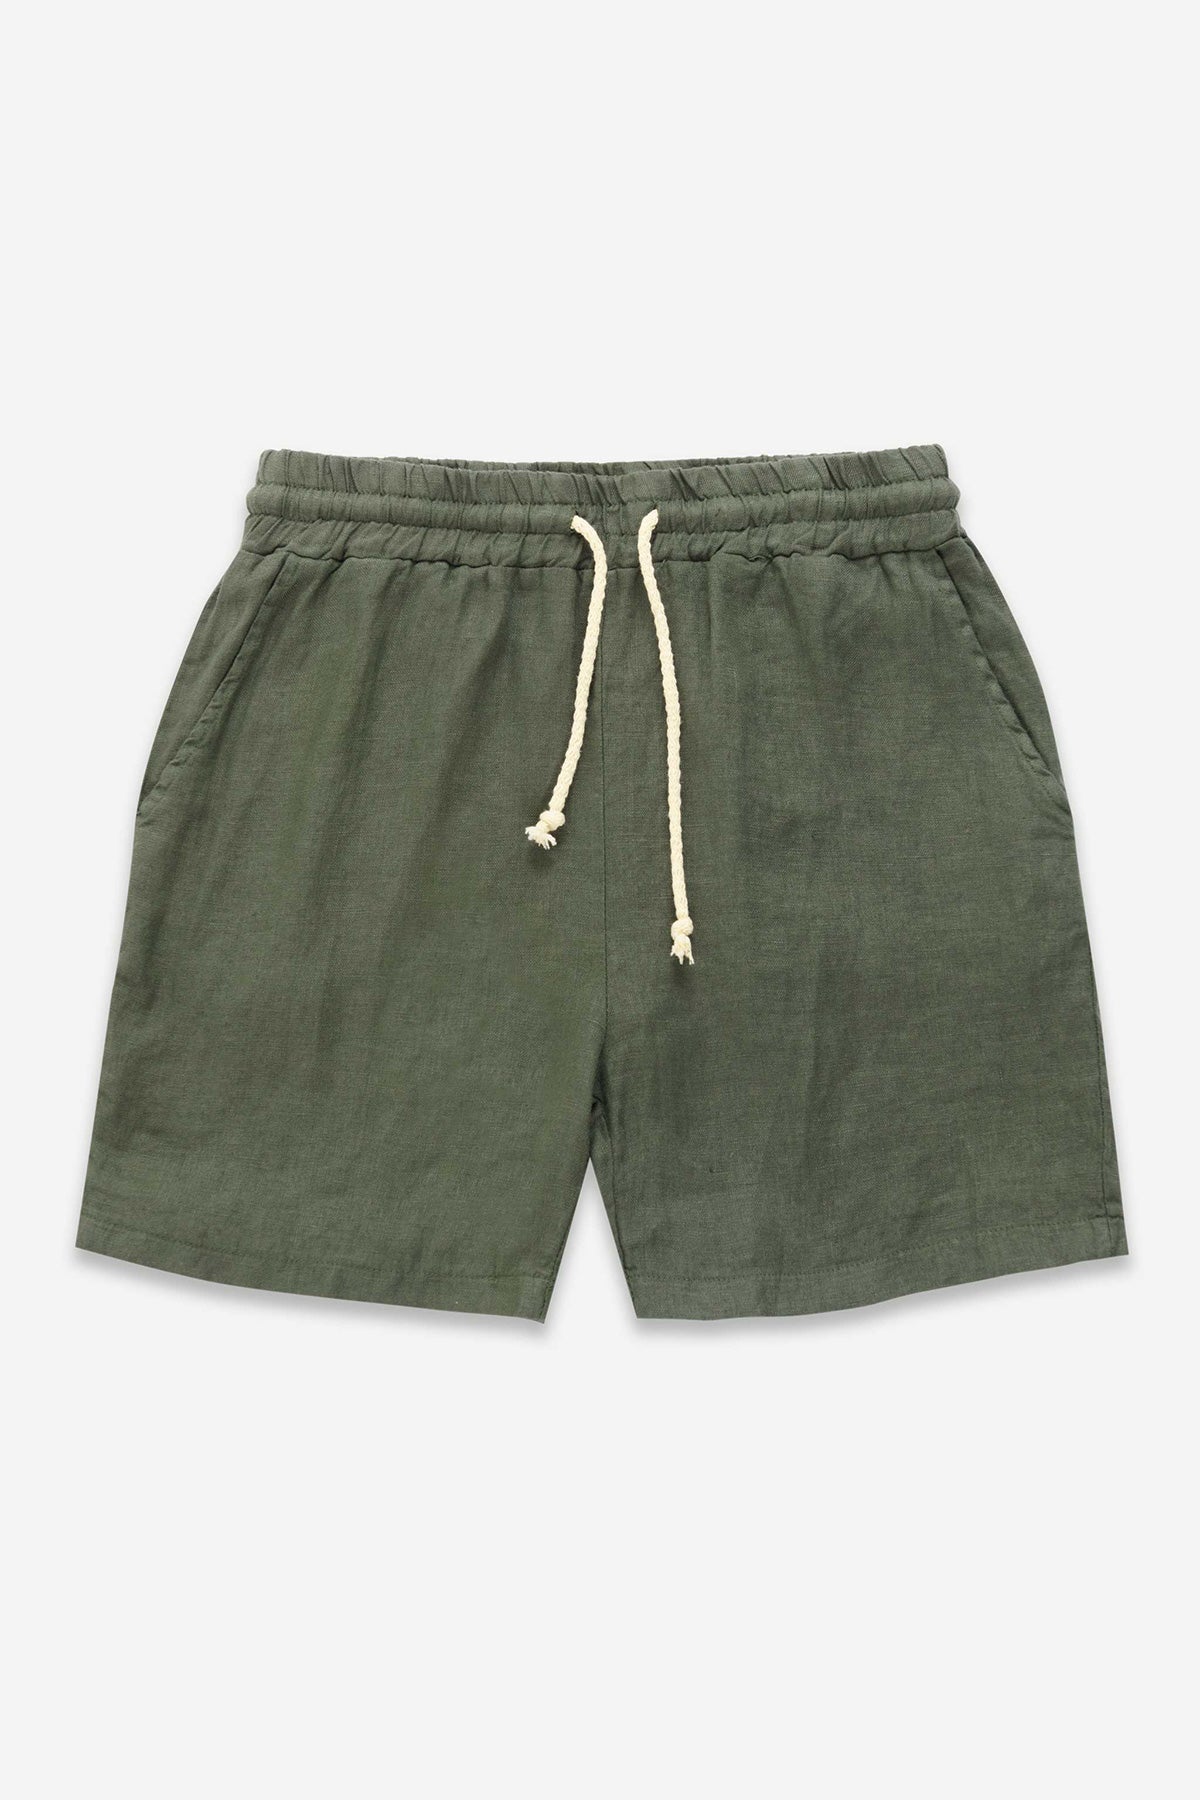 Olive Tailored Linen Shorts - Polonio